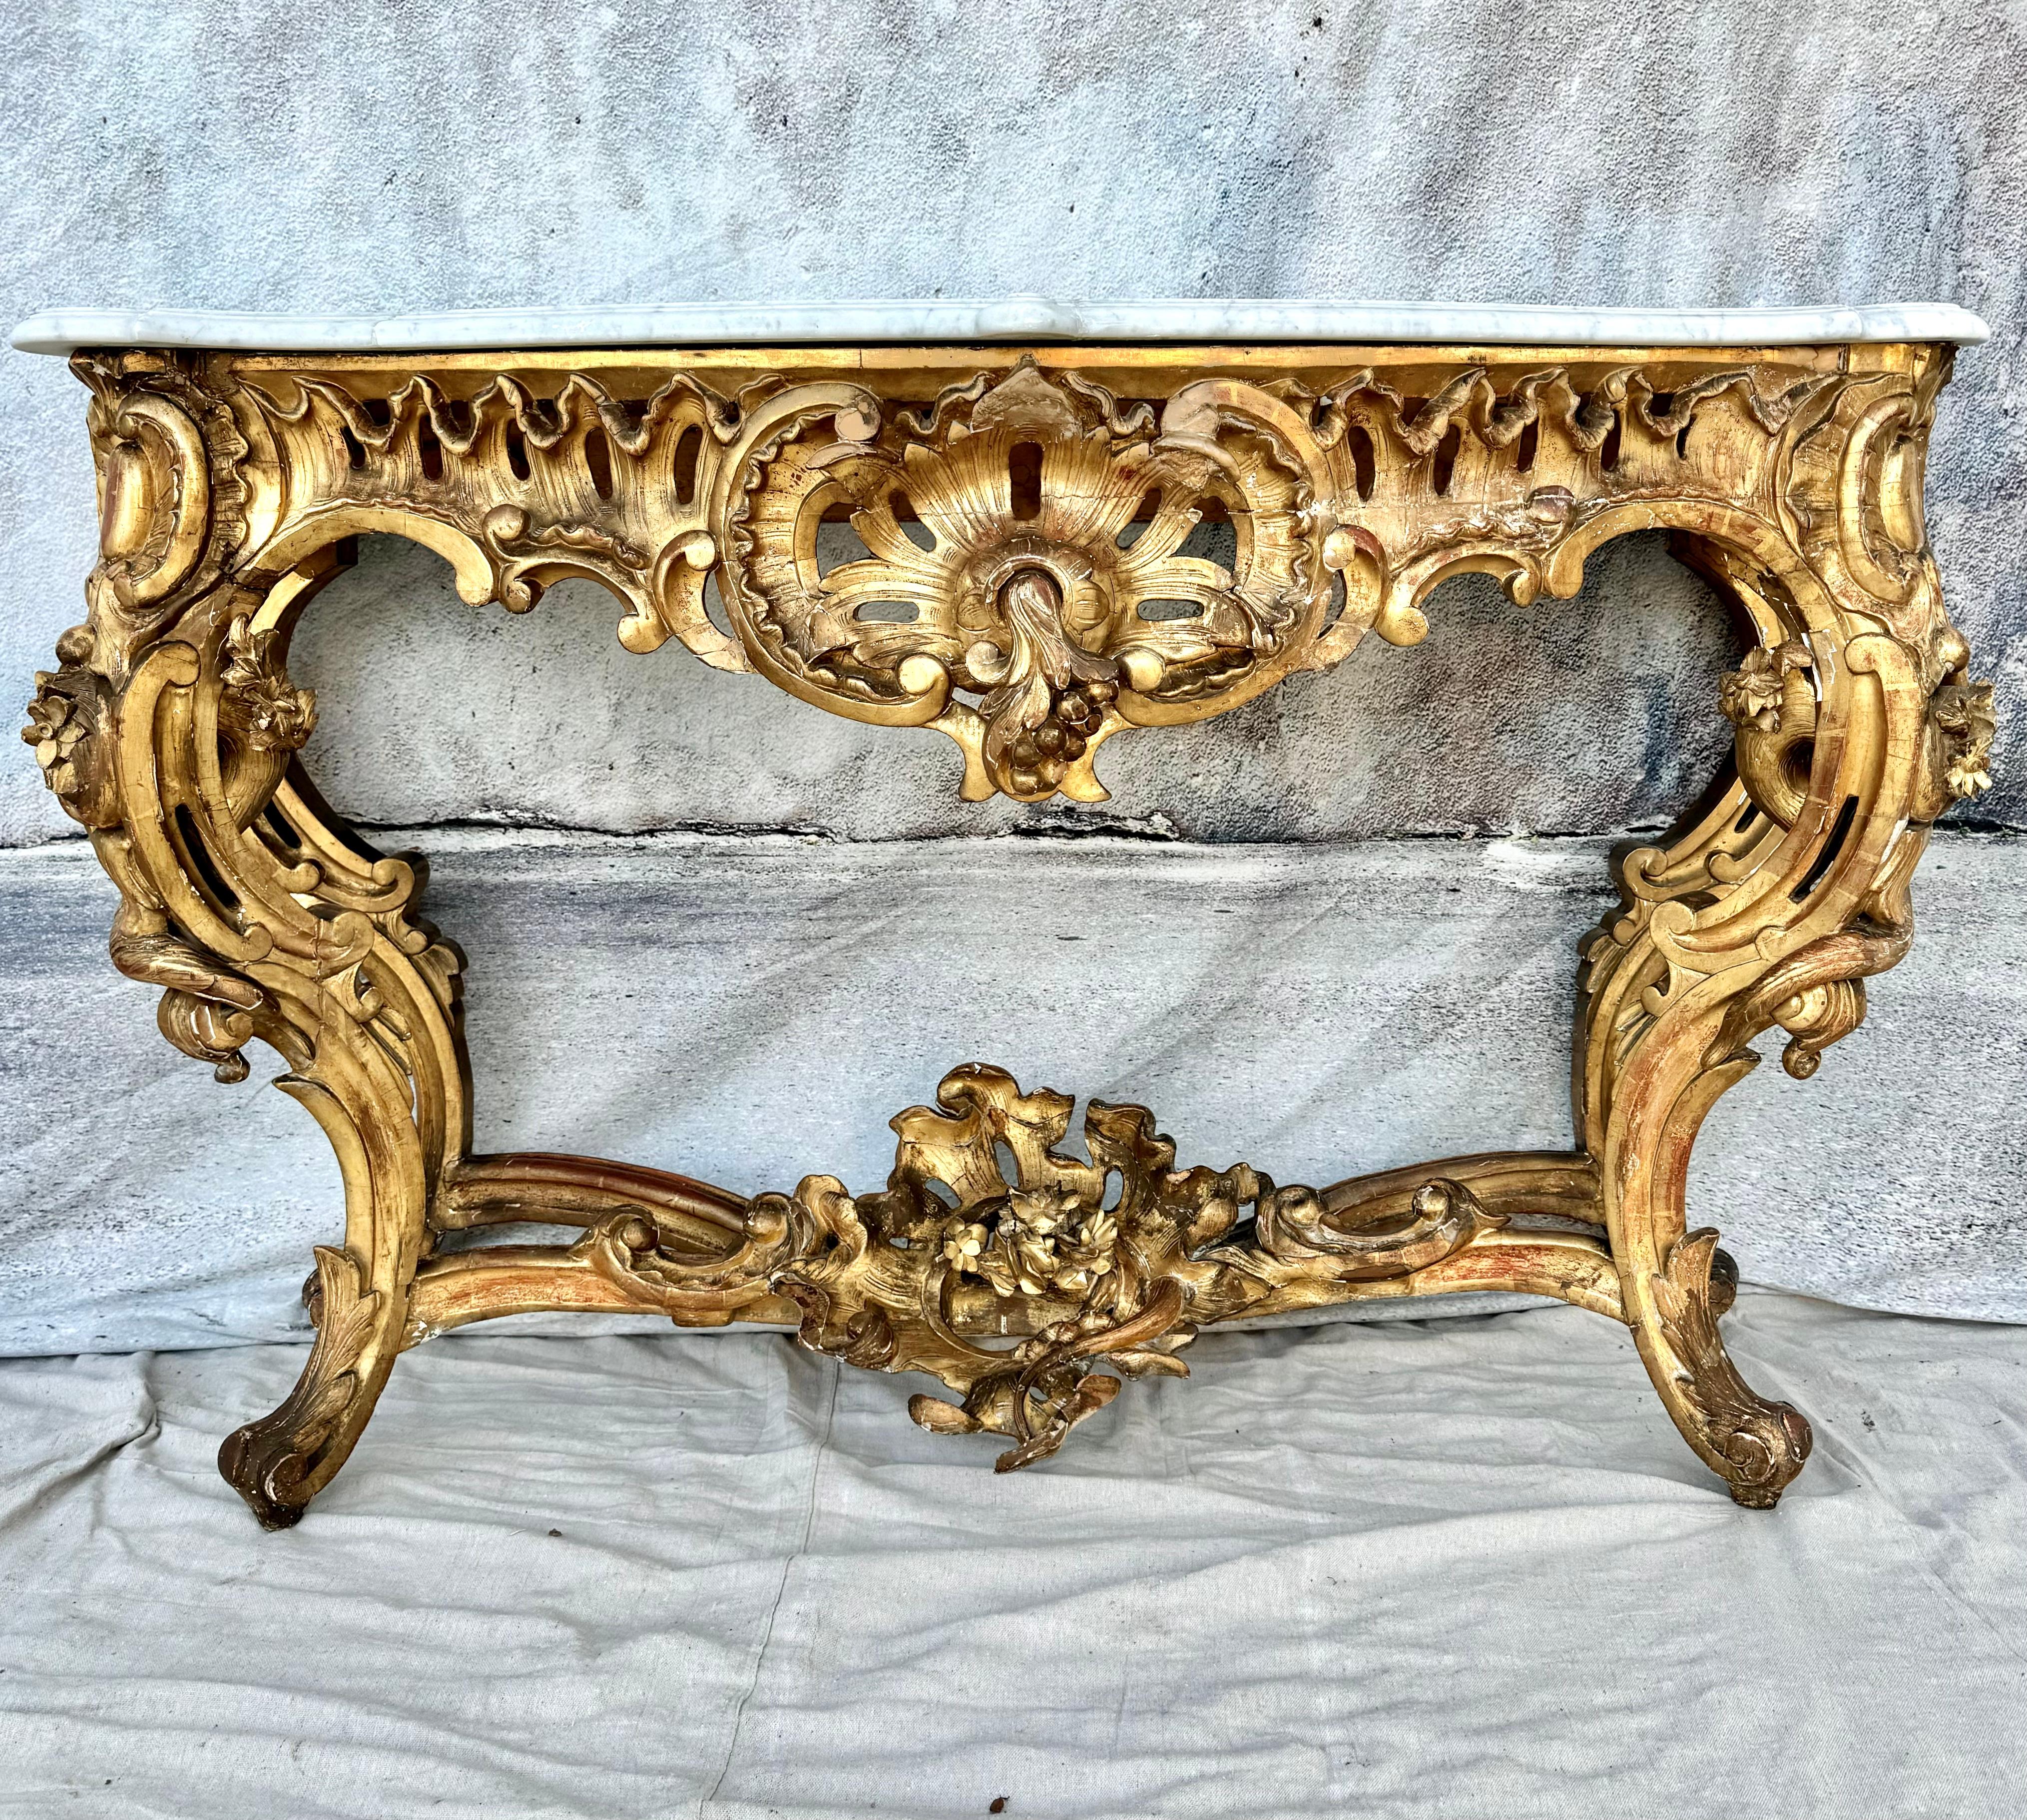 Early 19th Century Italian Louis XV Giltwood and Carrara Marble Top Console. This freestanding console table is raised by intricate carved cabriole legs on elegantly scrolled feet. Each leg is connected by an impressive giltwood foliate stretcher.